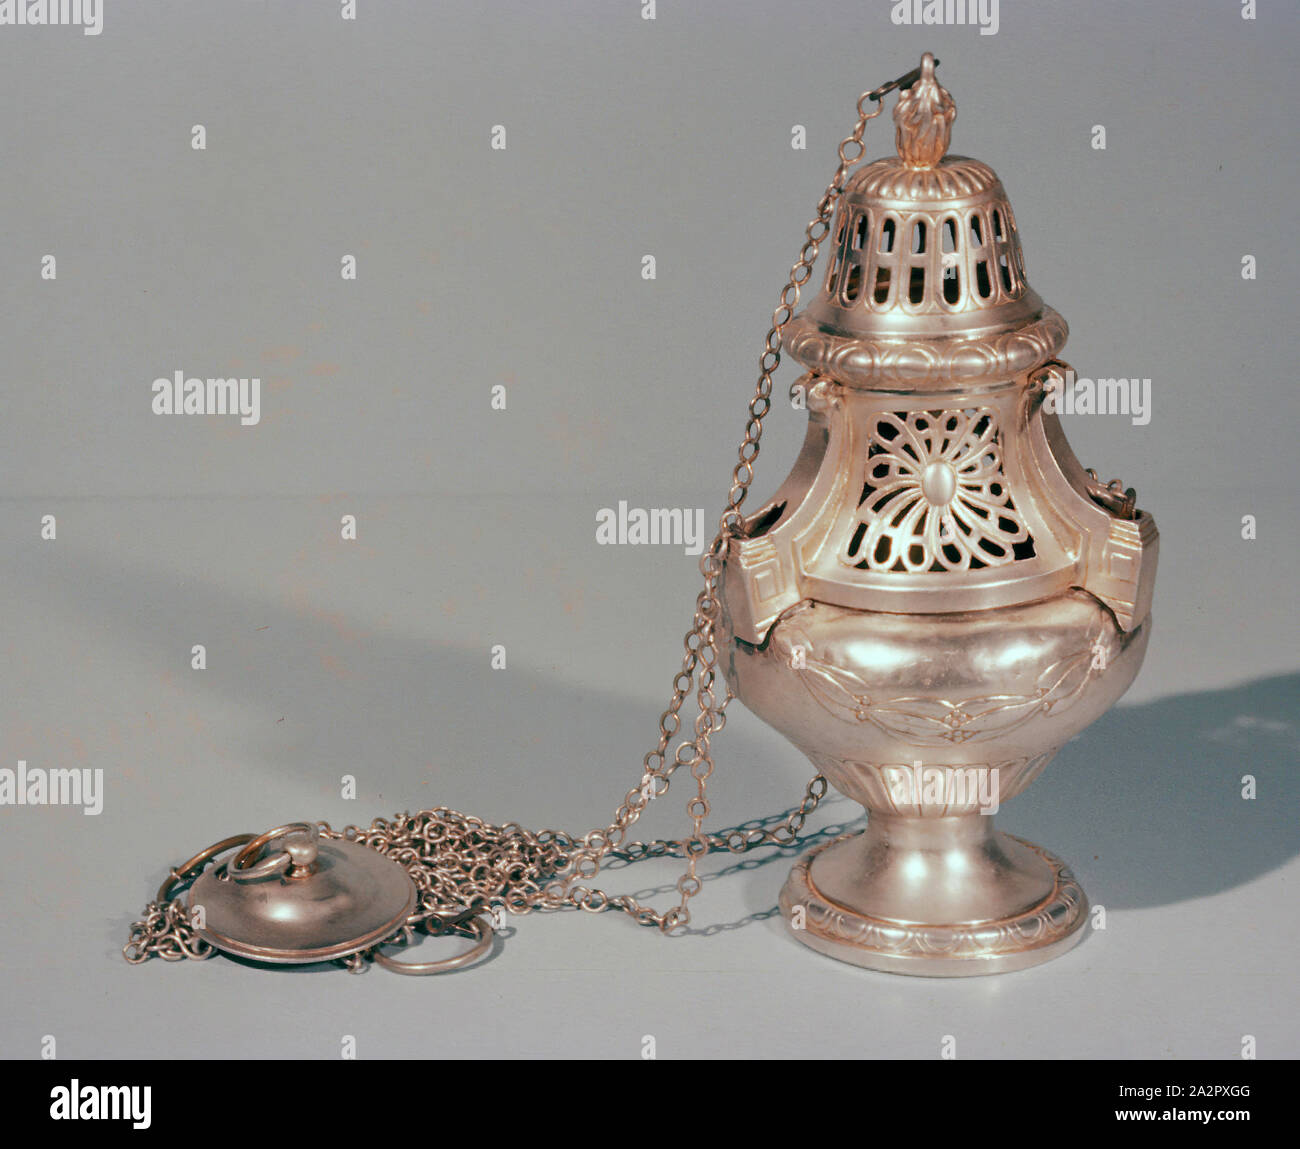 Laurent Amiot, Canadian, 1764-1839, Censer, 1804, metal, silver, Overall (width includes chain): 9 1/8 × 38 1/4 inches (23.2 × 97.2 cm Stock Photo